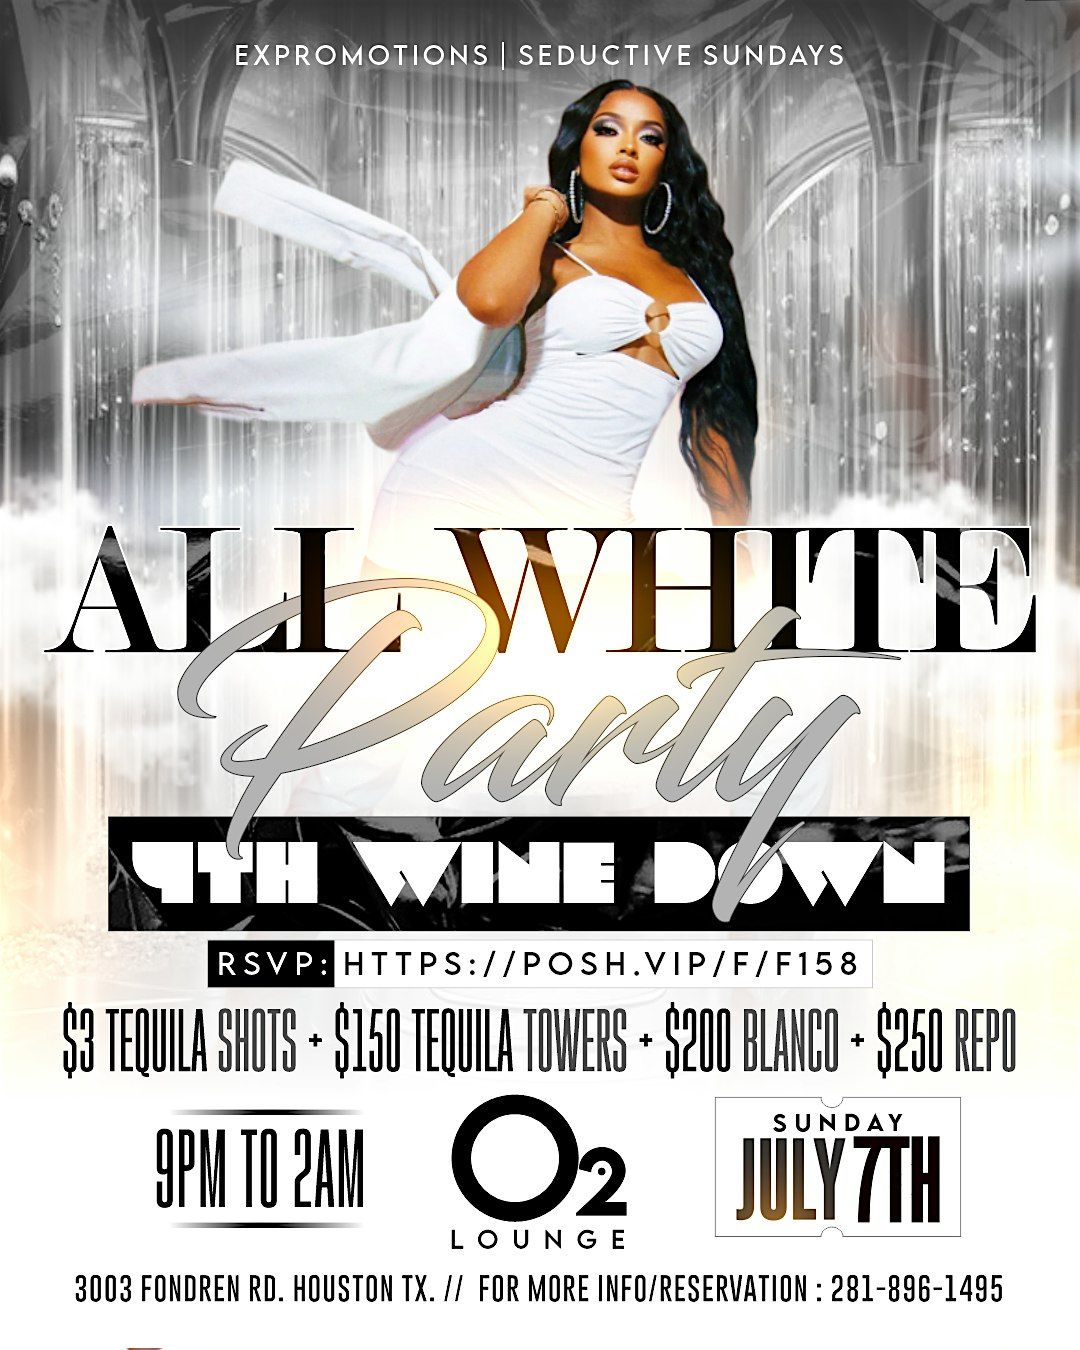 ALL WHITE PARTY ( 4th of July Wine Down) SUN JULY 7TH | O2 LOUNGE